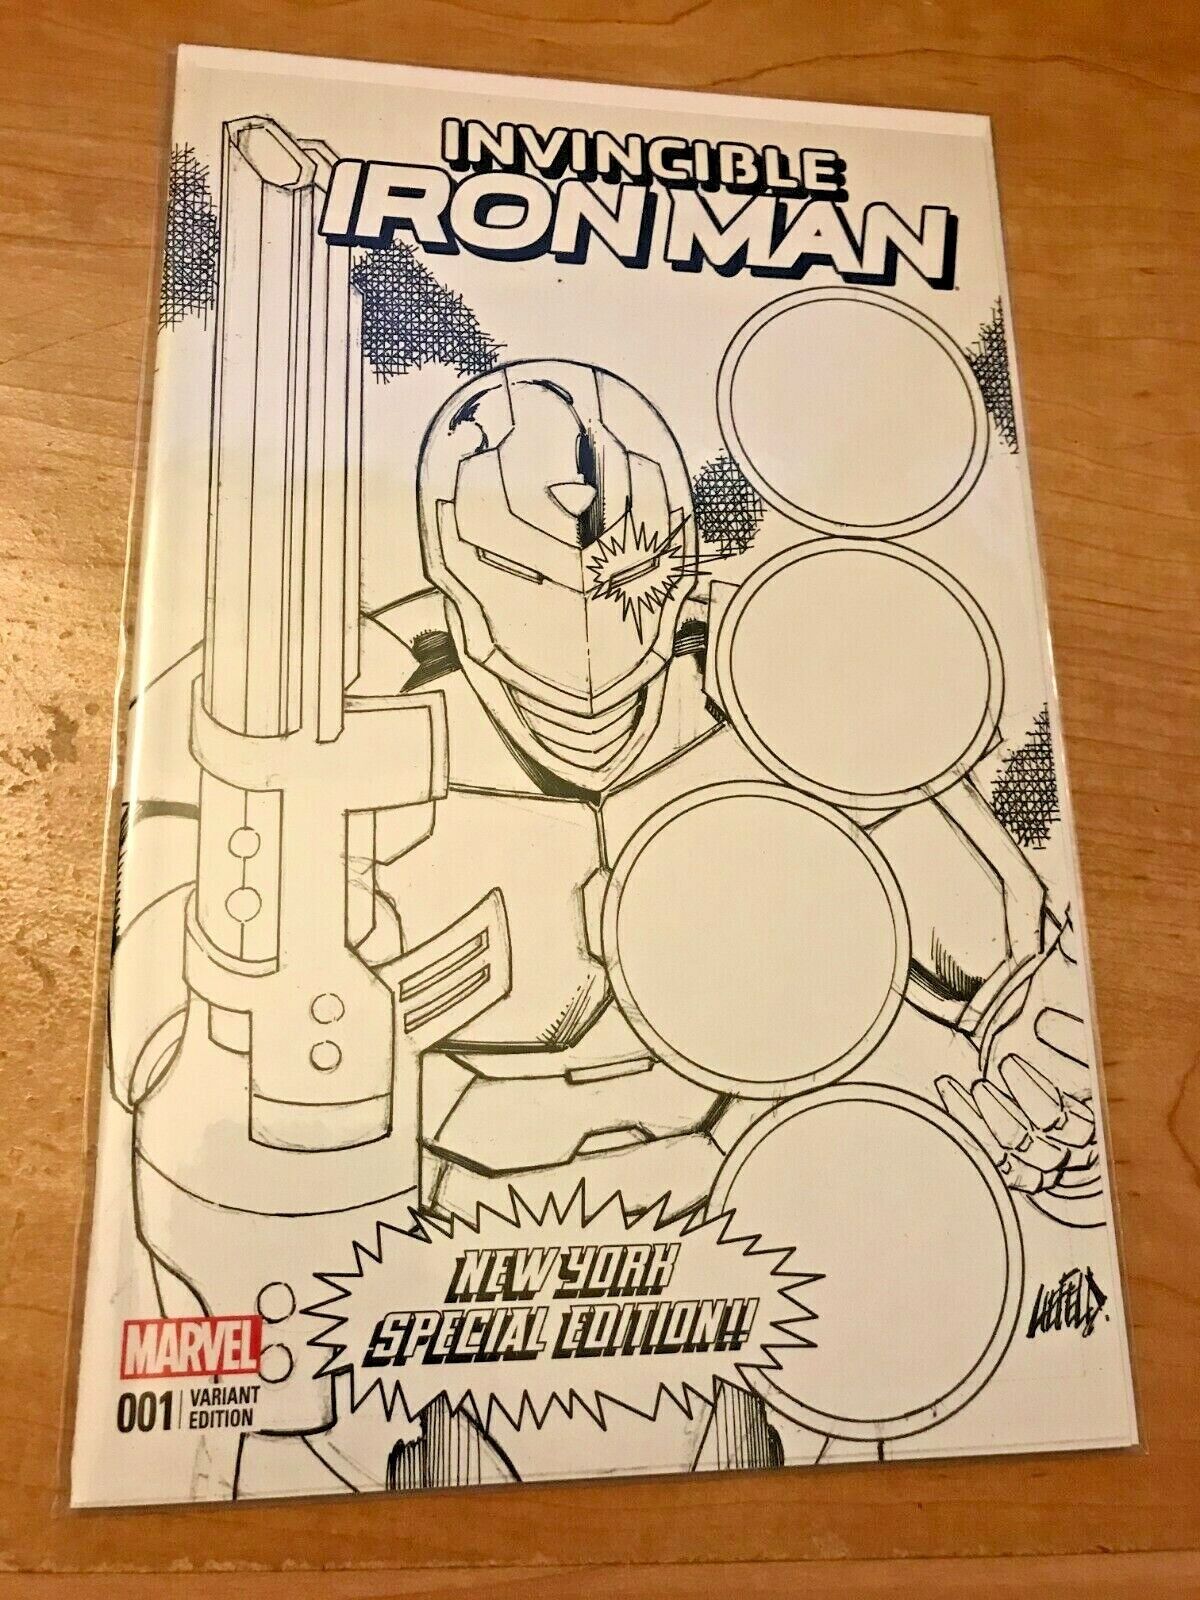 Invincible Iron Man #1: NYCC Liefeld Blank Black & White Variant Cover